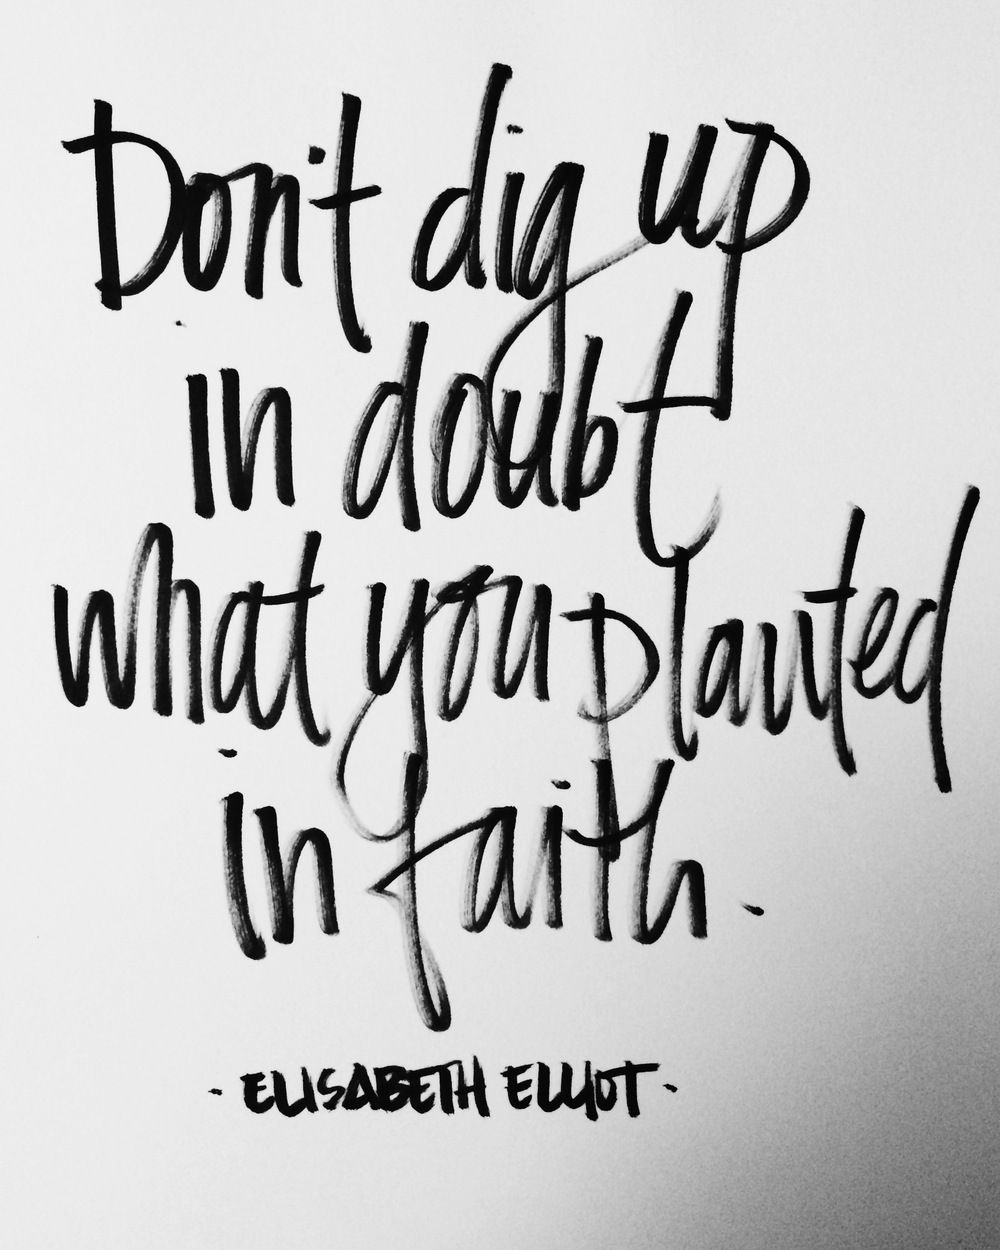 don’t dig up in doubt what you planted in faith. elisabeth elliot